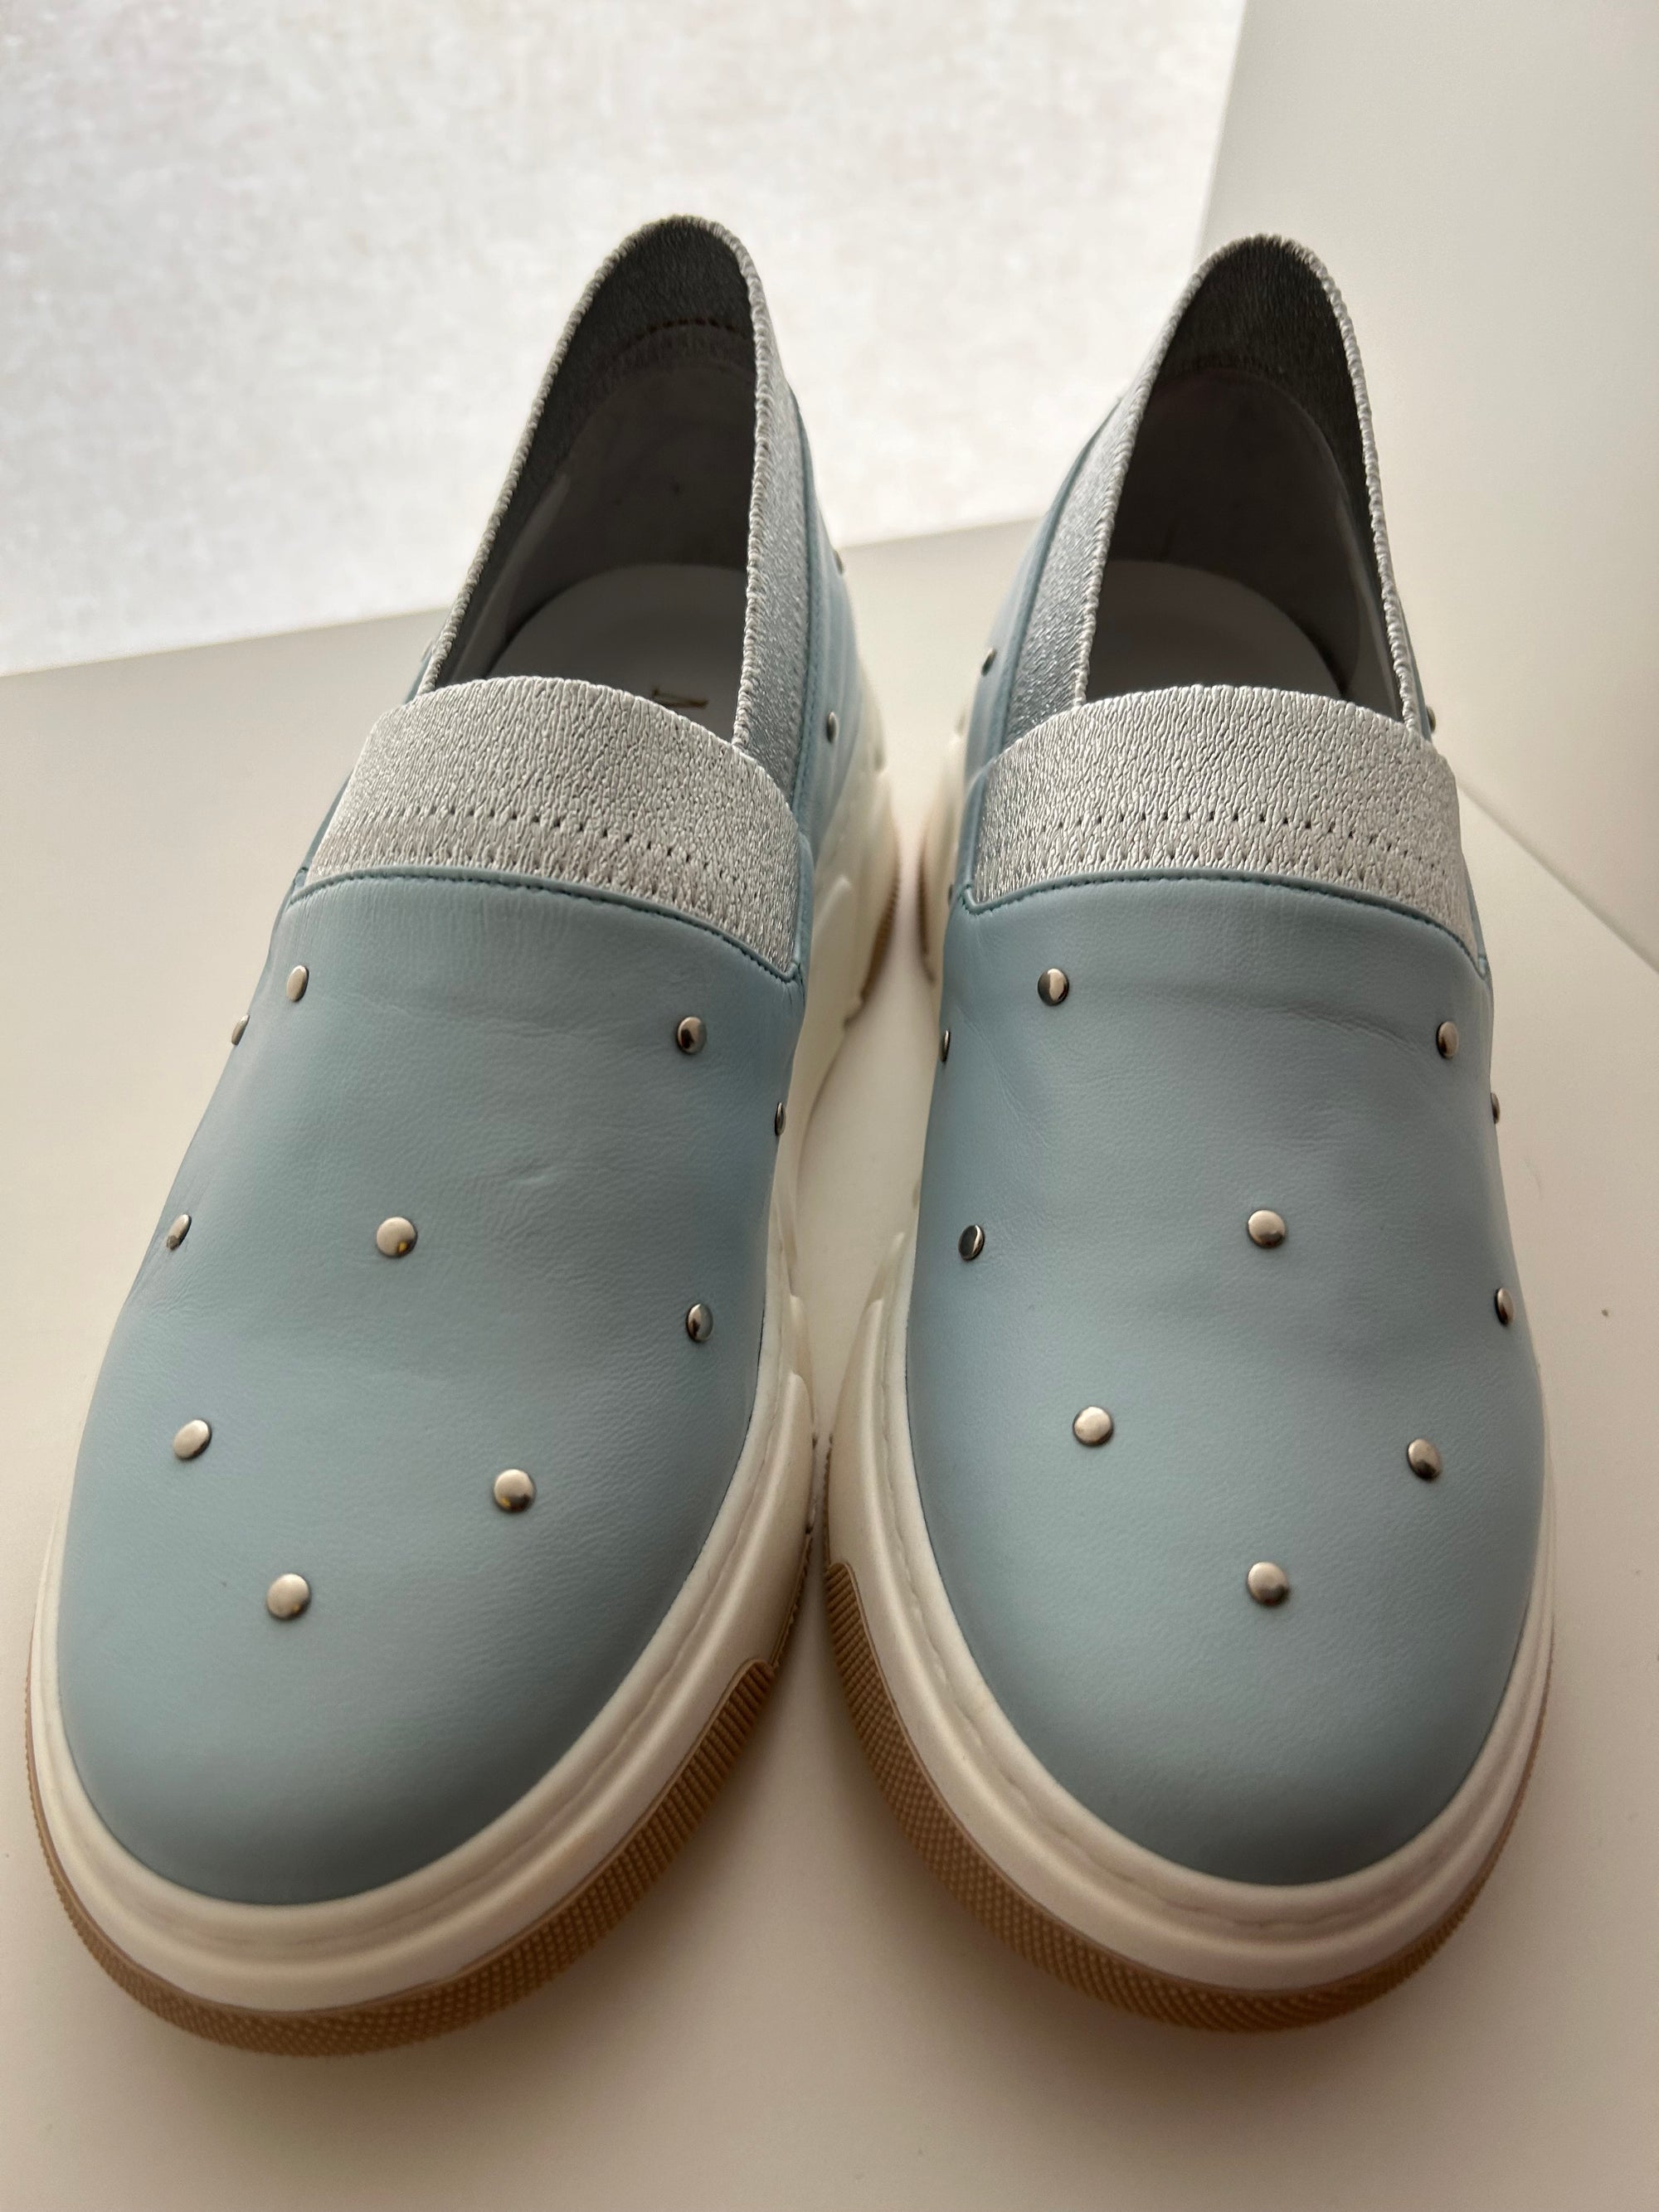 Marco Moreo 24038 Powder blue loafer